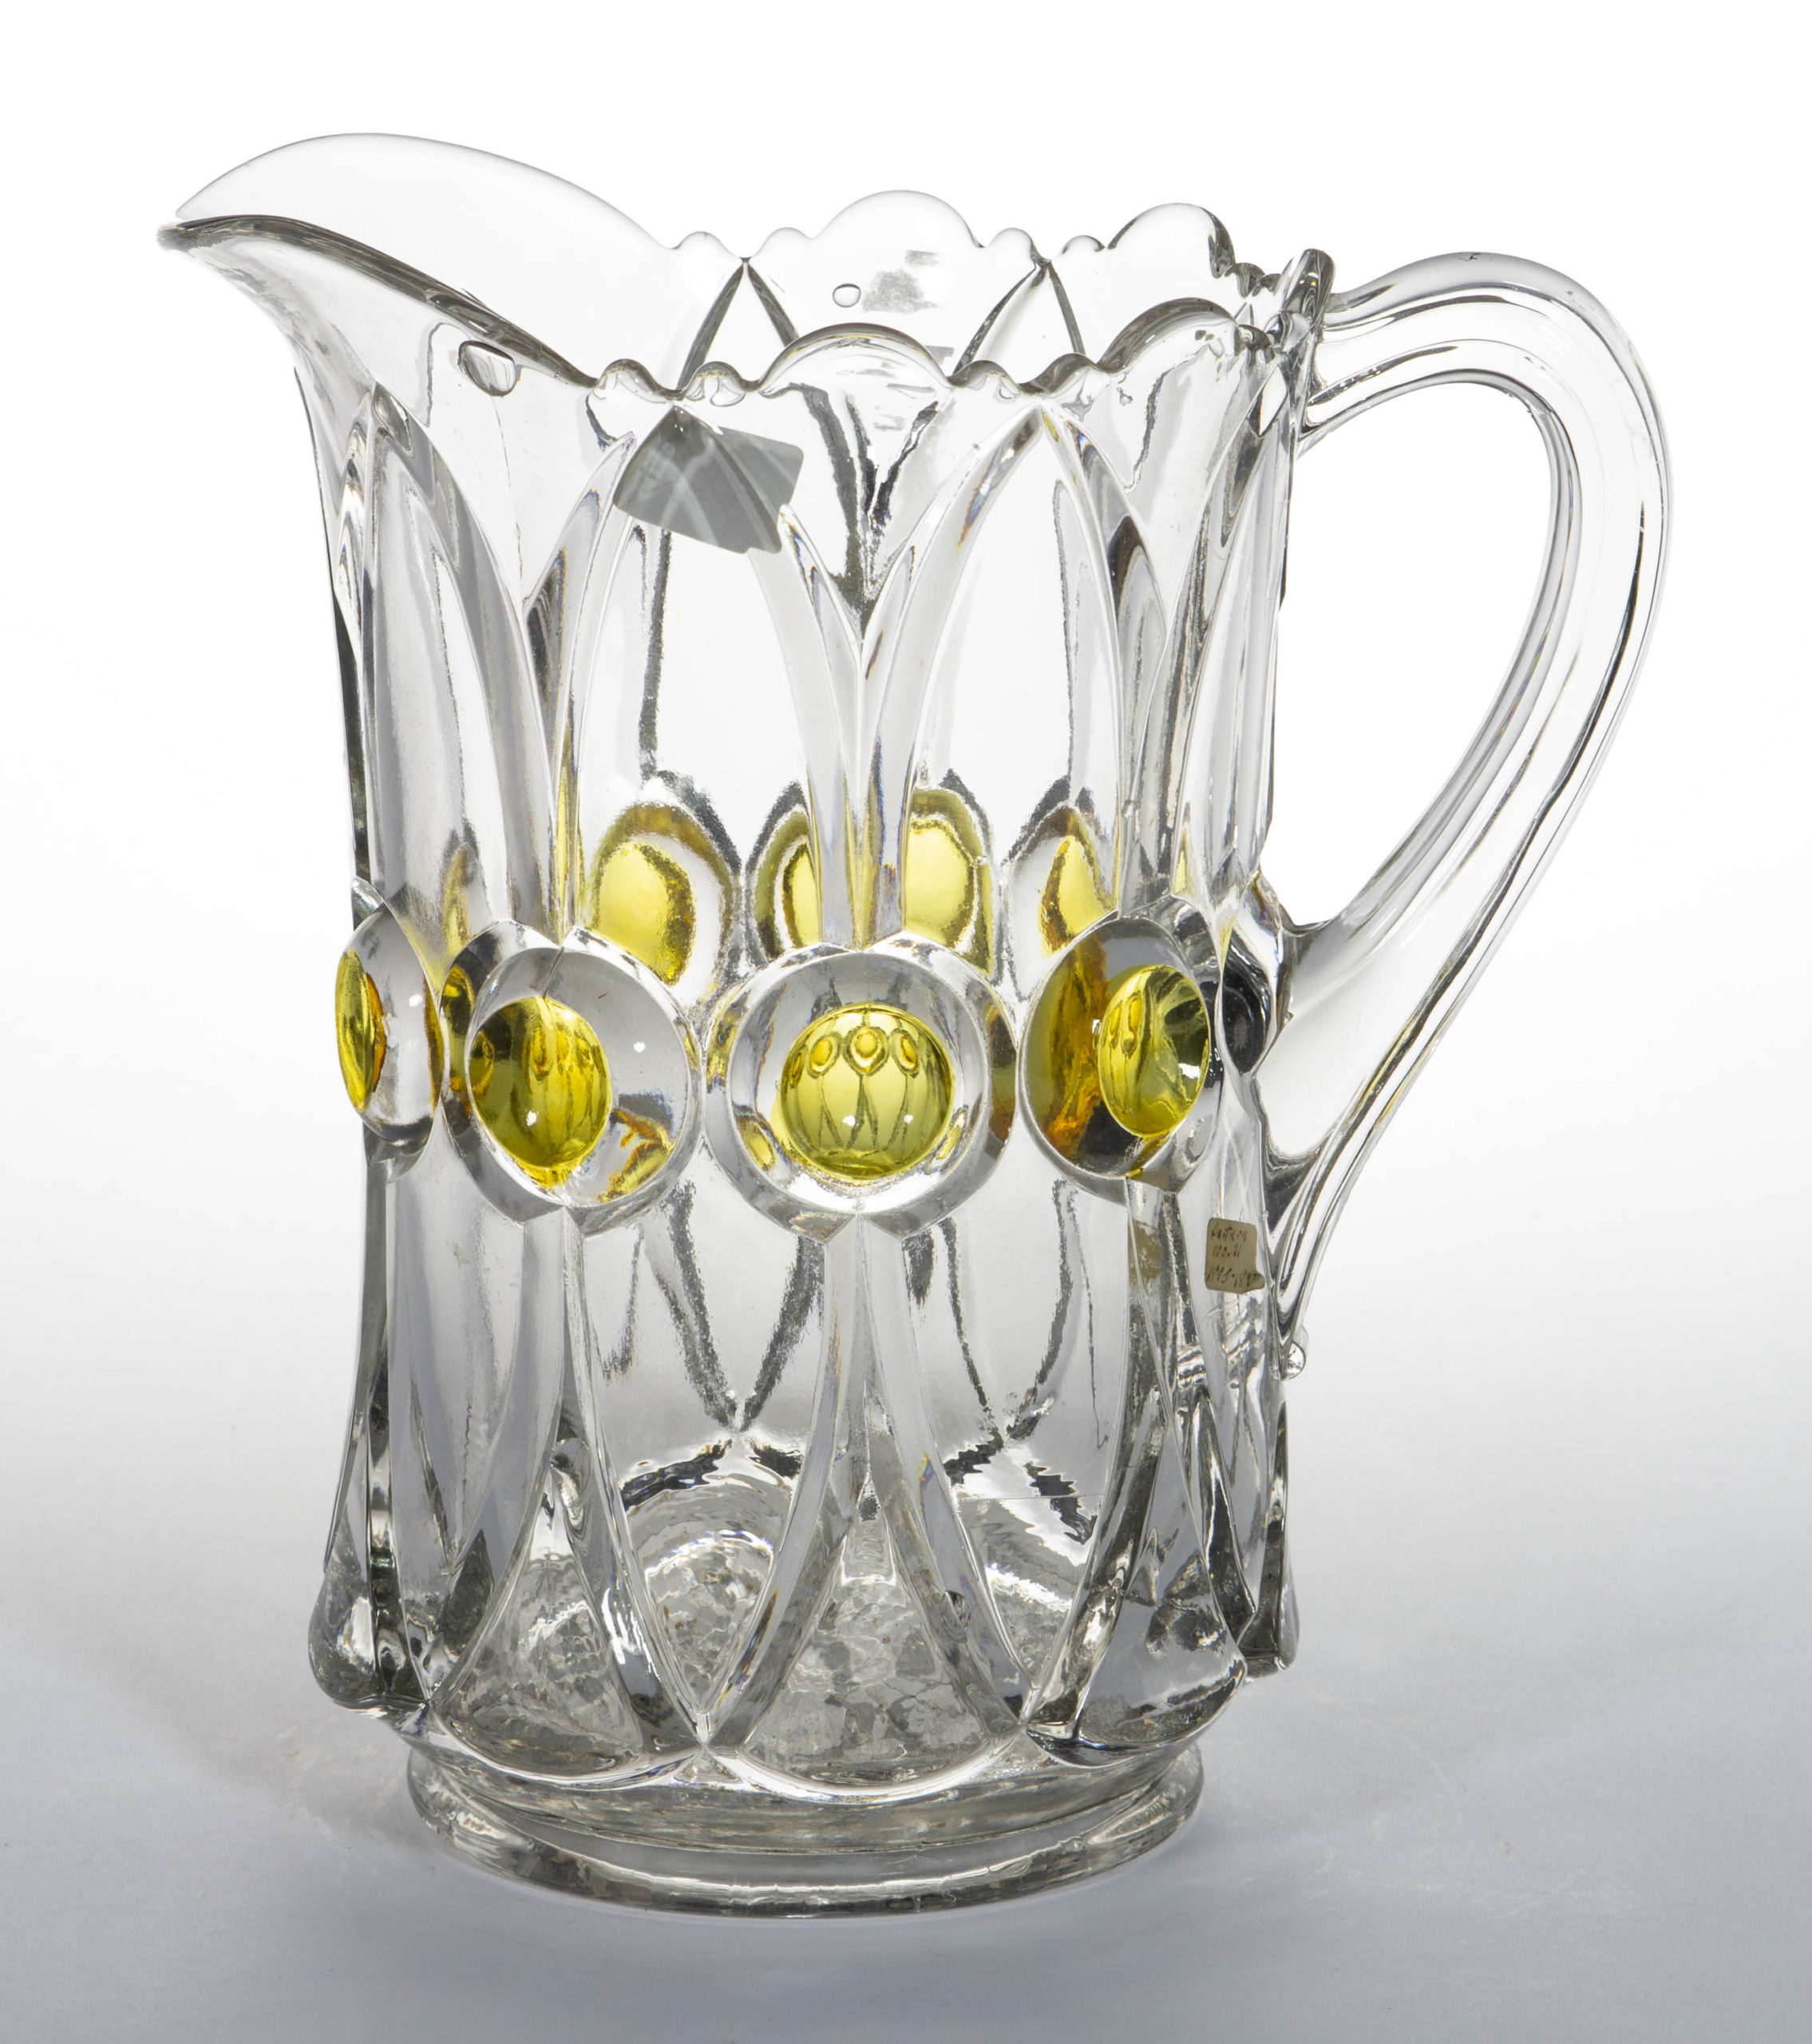 CRYSTAL’S NO. 21 / BULLSEYE AND ARROWHEAD – AMBER-STAINED WATER PITCHER,